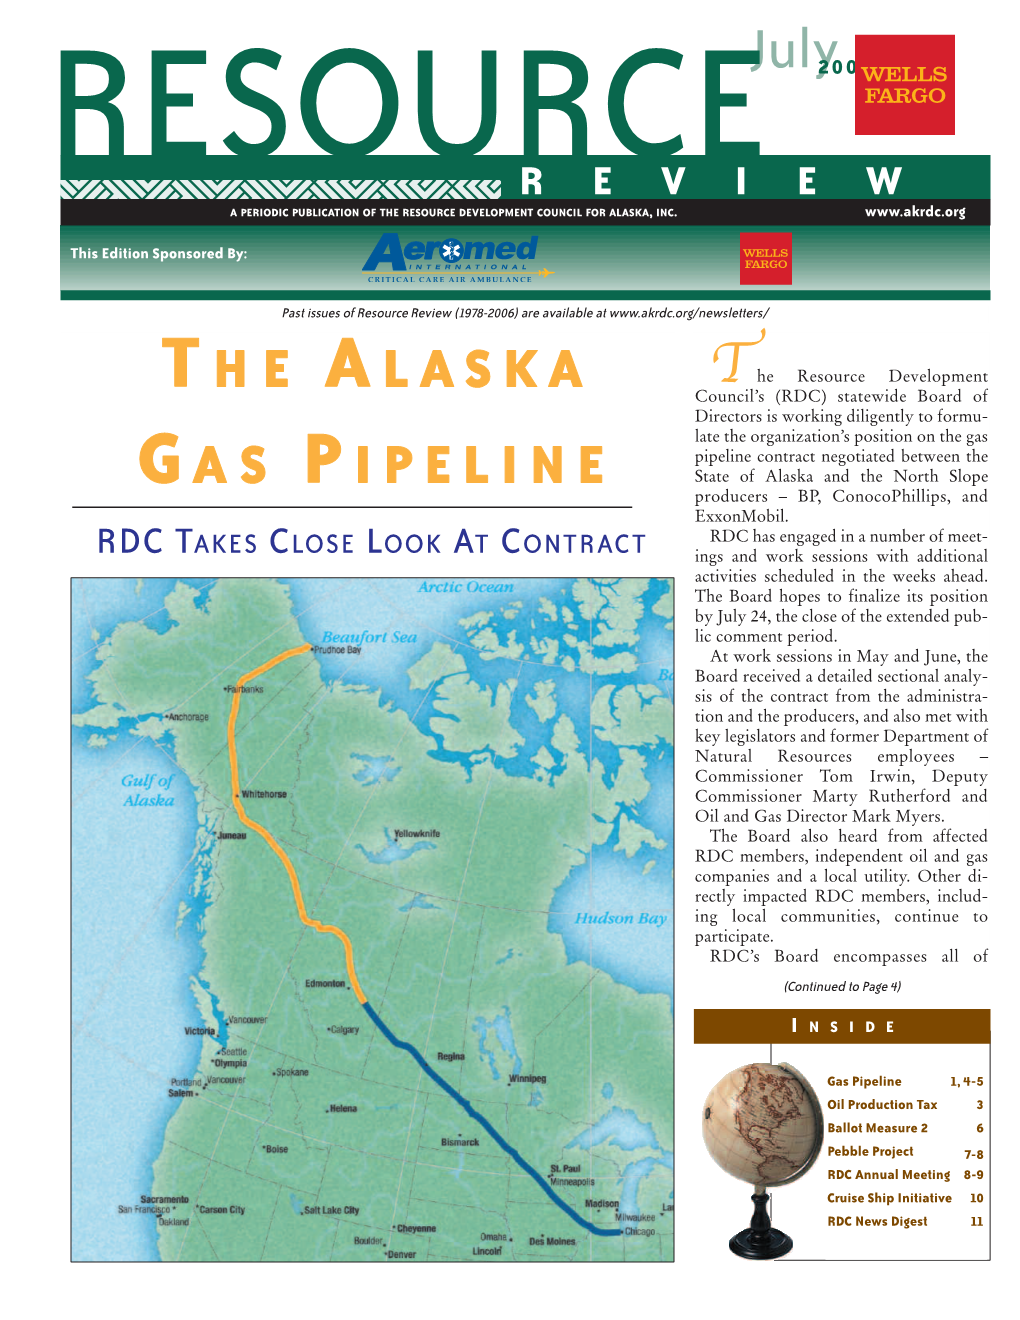 Gas Pipeline Contract Negotiated Between the G a S P I P E L I N E State of Alaska and the North Slope Producers – BP, Conocophillips, and Exxonmobil